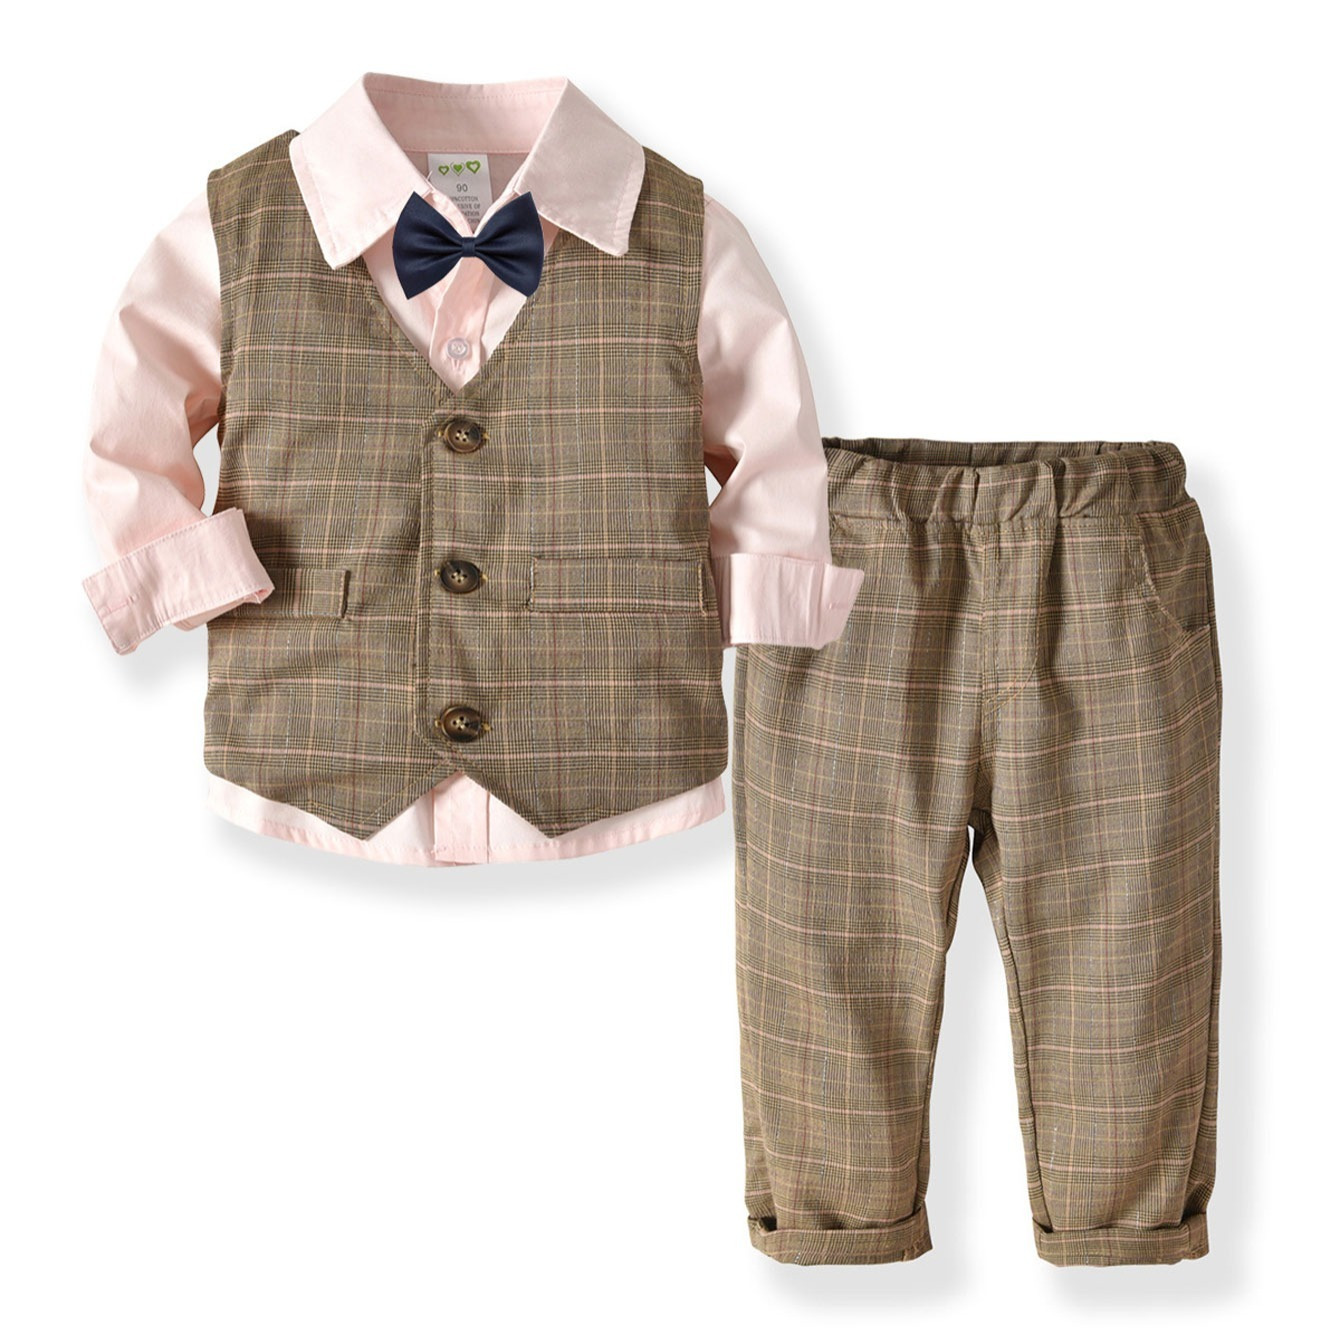 

Baby Toddler Boys Gentleman Bowtie Outfits Long Sleeve Suit